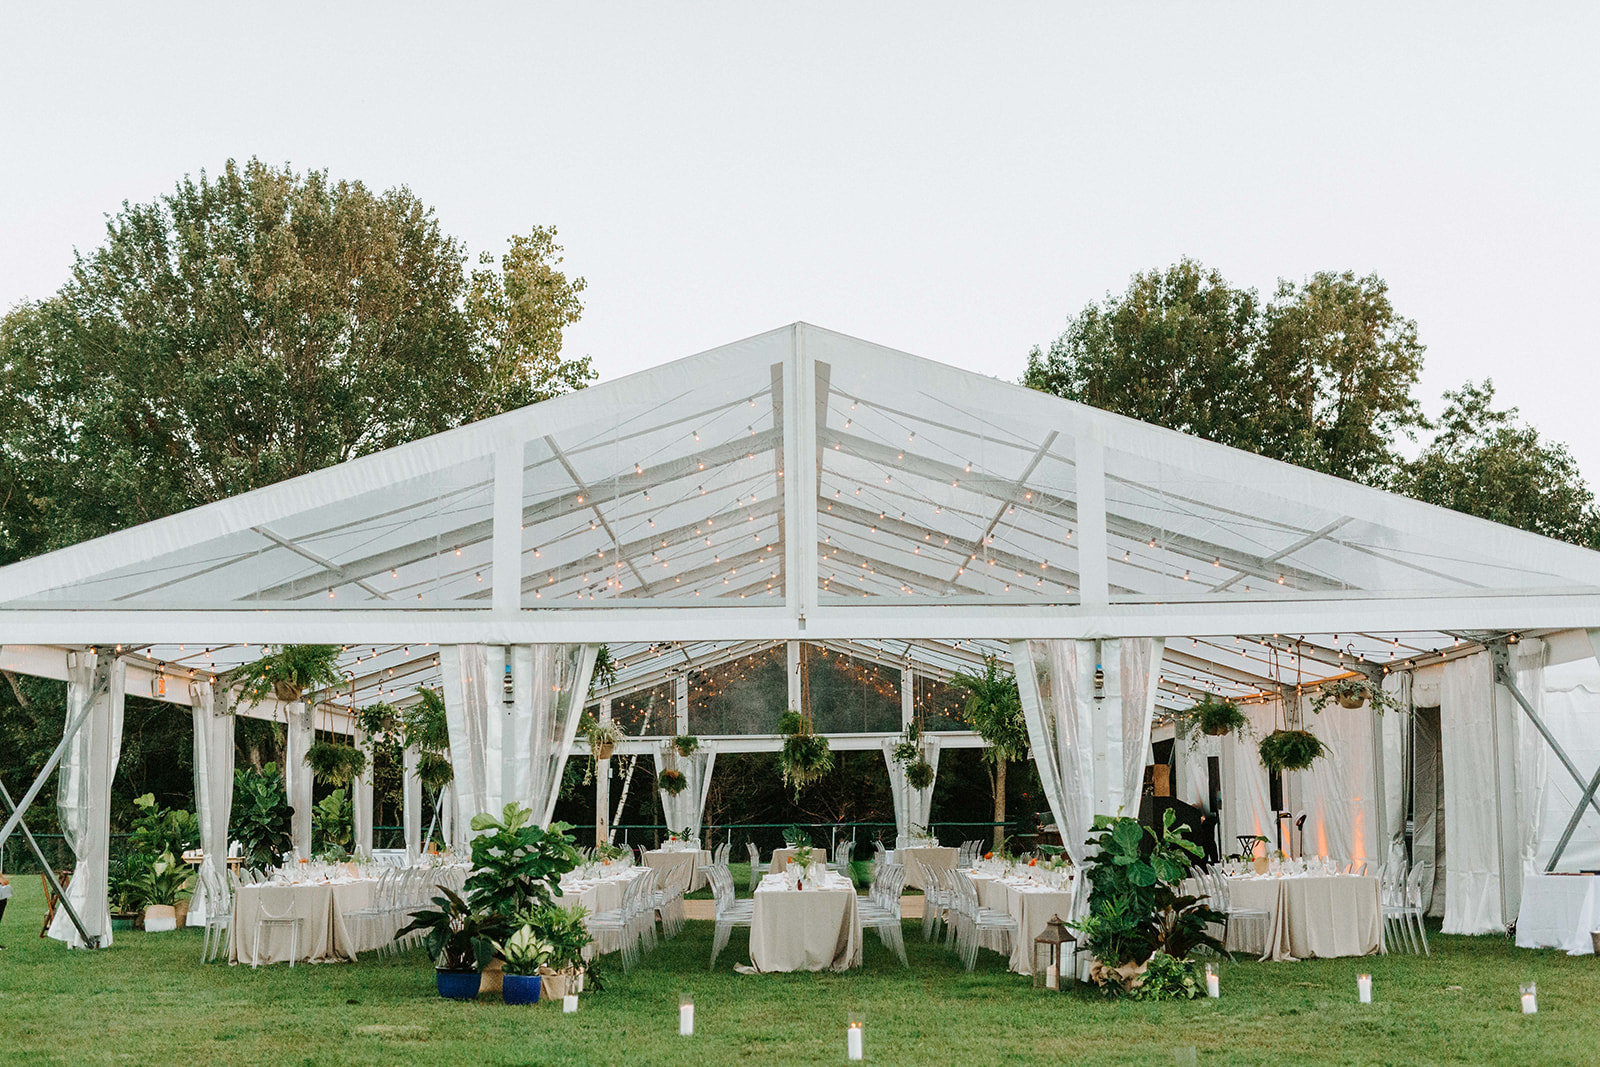 Monica-Relyea-Events-Hyde-Photography-Camp-Scatico-Wedding-Upstate-New-York-NY-Hudson-Valley-Elizaville-Tivoli-Tropical-Clear-Tent-Outdoor-NYC-Planner-Fall-Jewish-608